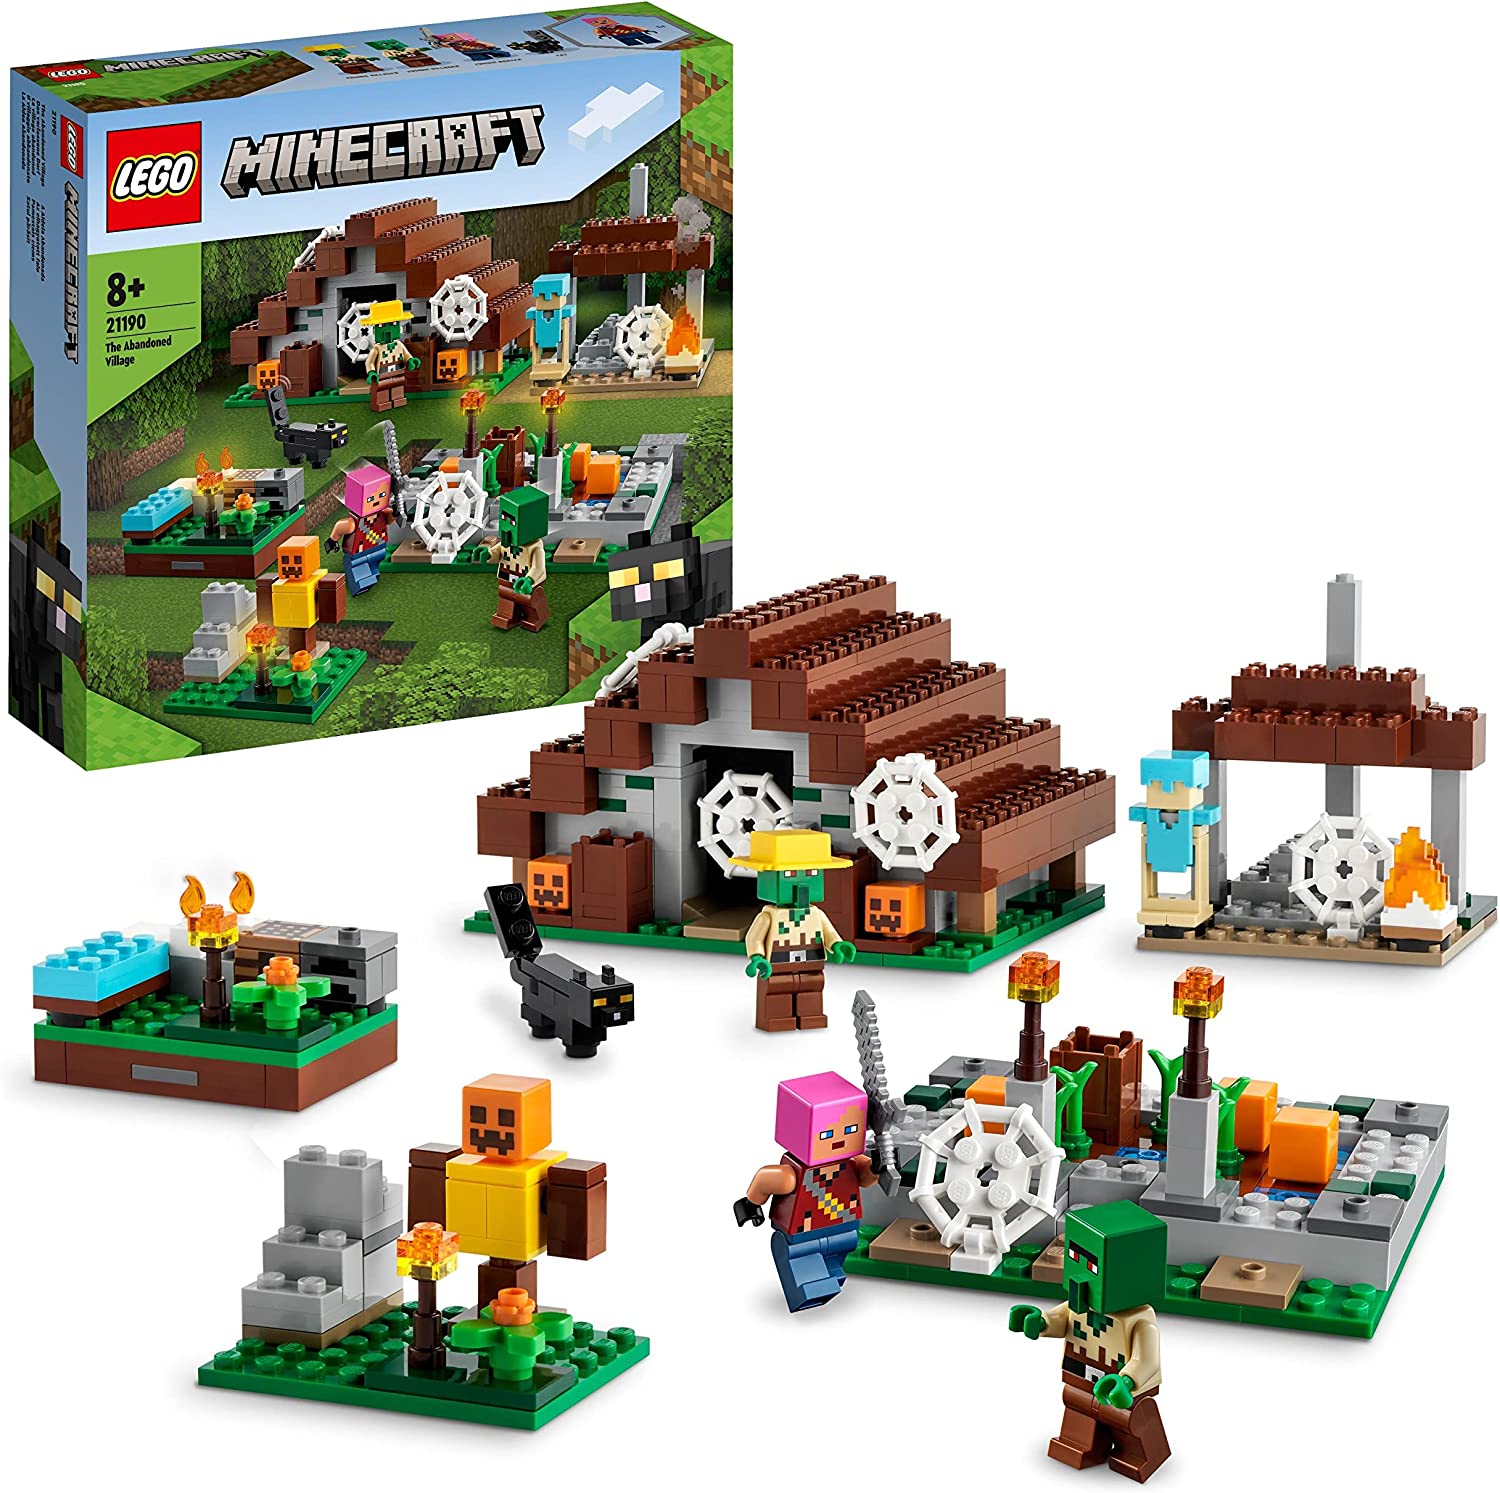 LEGO 21190 Minecraft The Abandoned Village, Toy with Zombie Hunters Camping, Workshop, Farm and House Accessories, Zombie Village Inhabitants and Cat